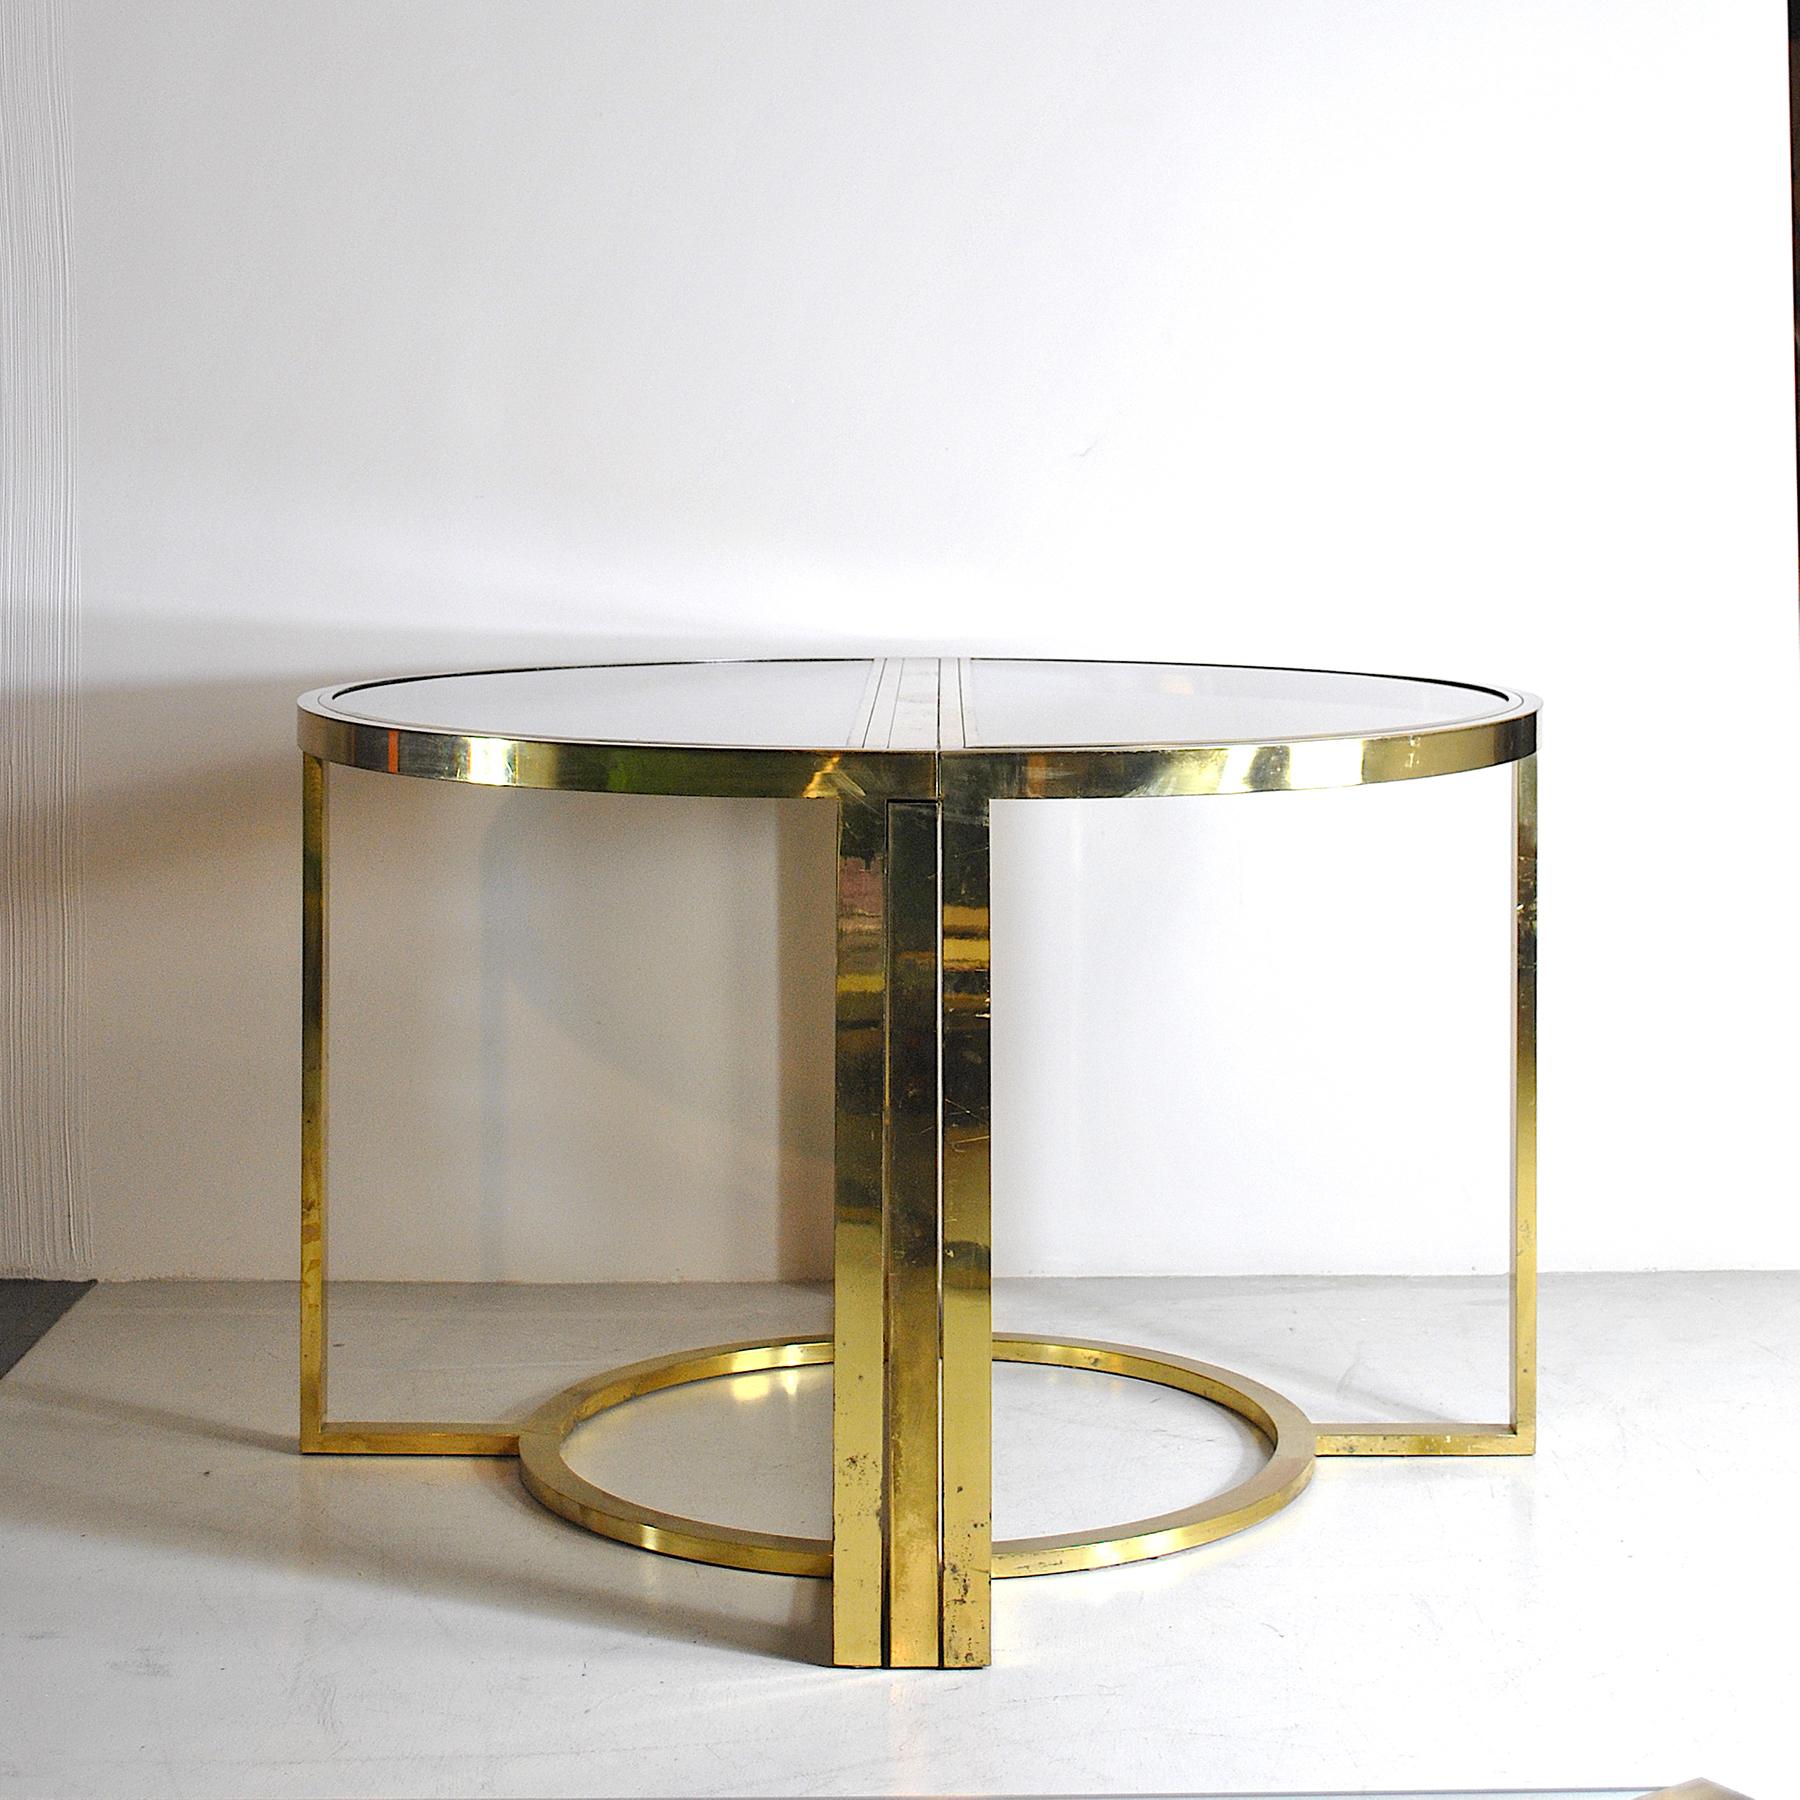 Round table extendable from the structure completely in brass, its peculiarity beyond the refinement and materials used, is in the possibility of extension. Roman production Start 70s Romeo Rega.

Maximum table length 190 cm.